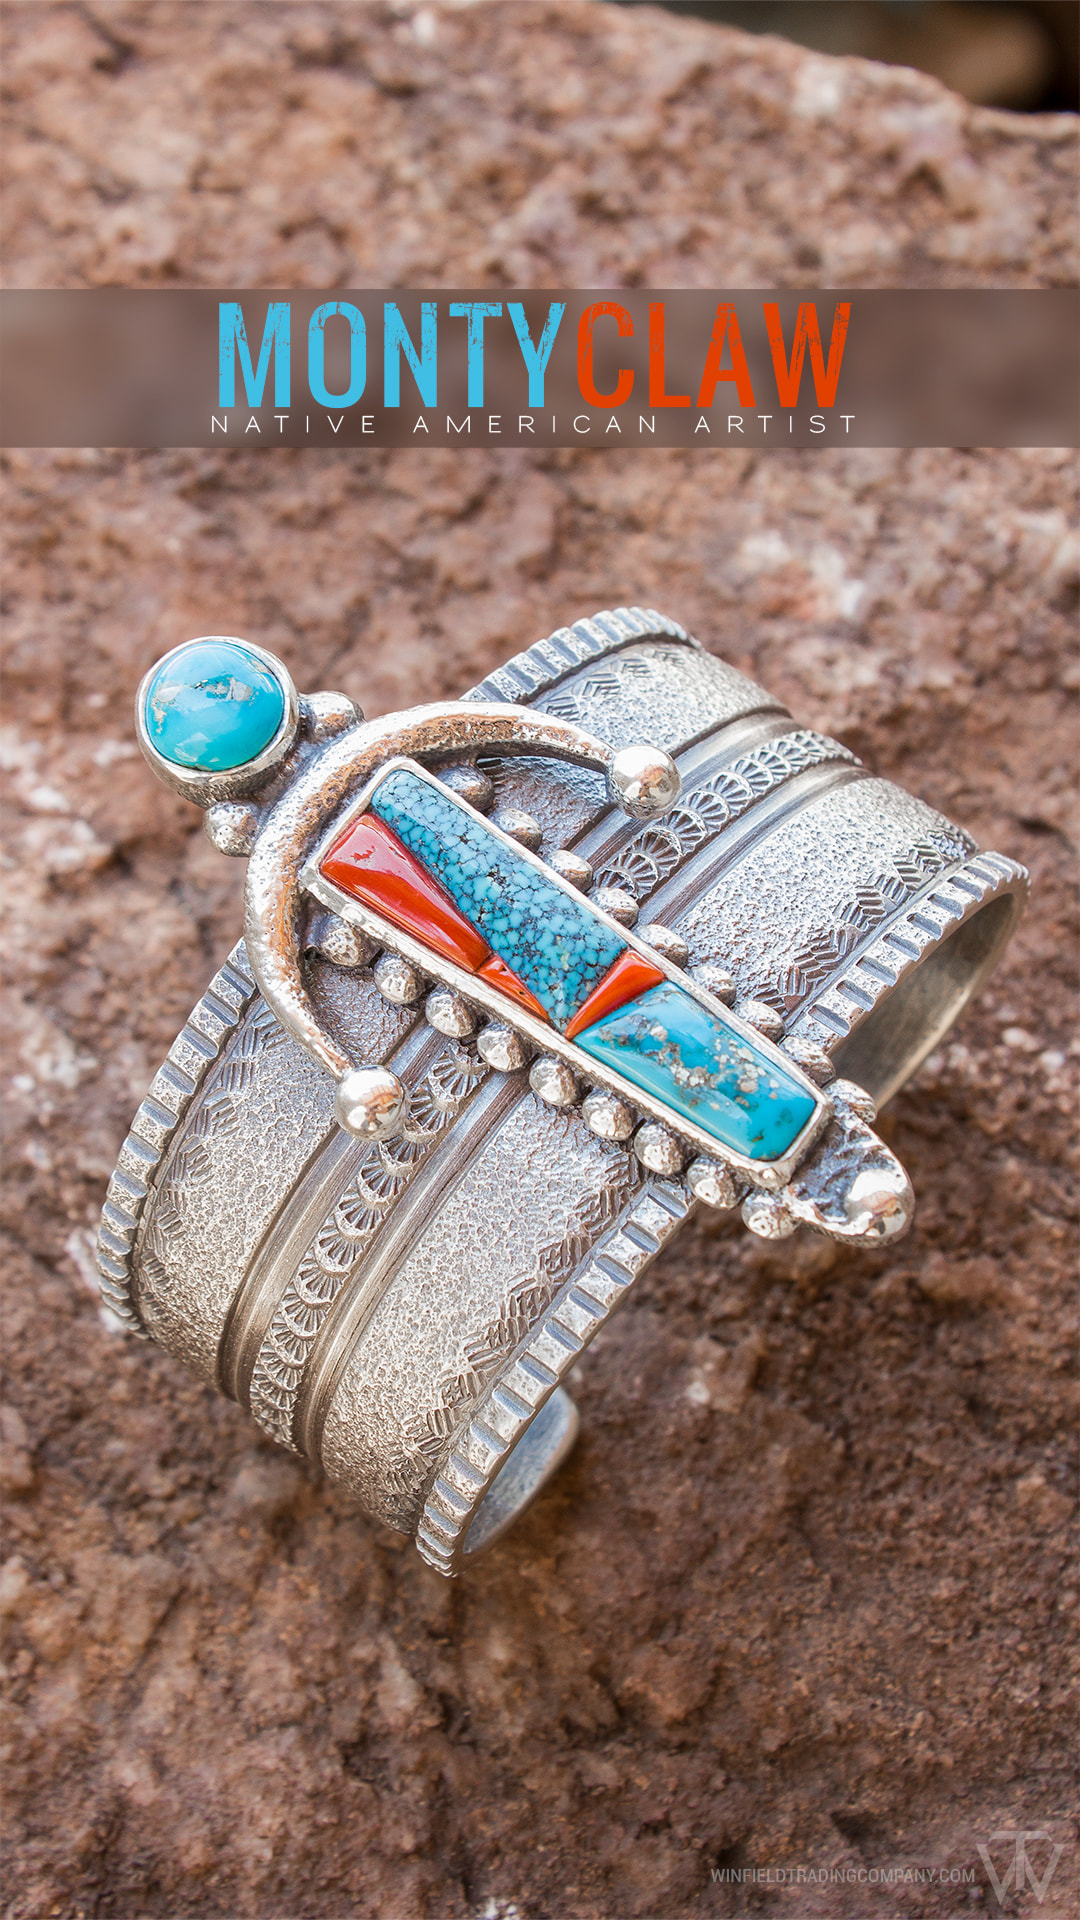 A Gorgeous Bracelet by Navajo artist Monty Claw. A great old style look with some beautiful stones. Kingman, Morecni, and Coral. A nice two piece tufa cast combo. Love it!